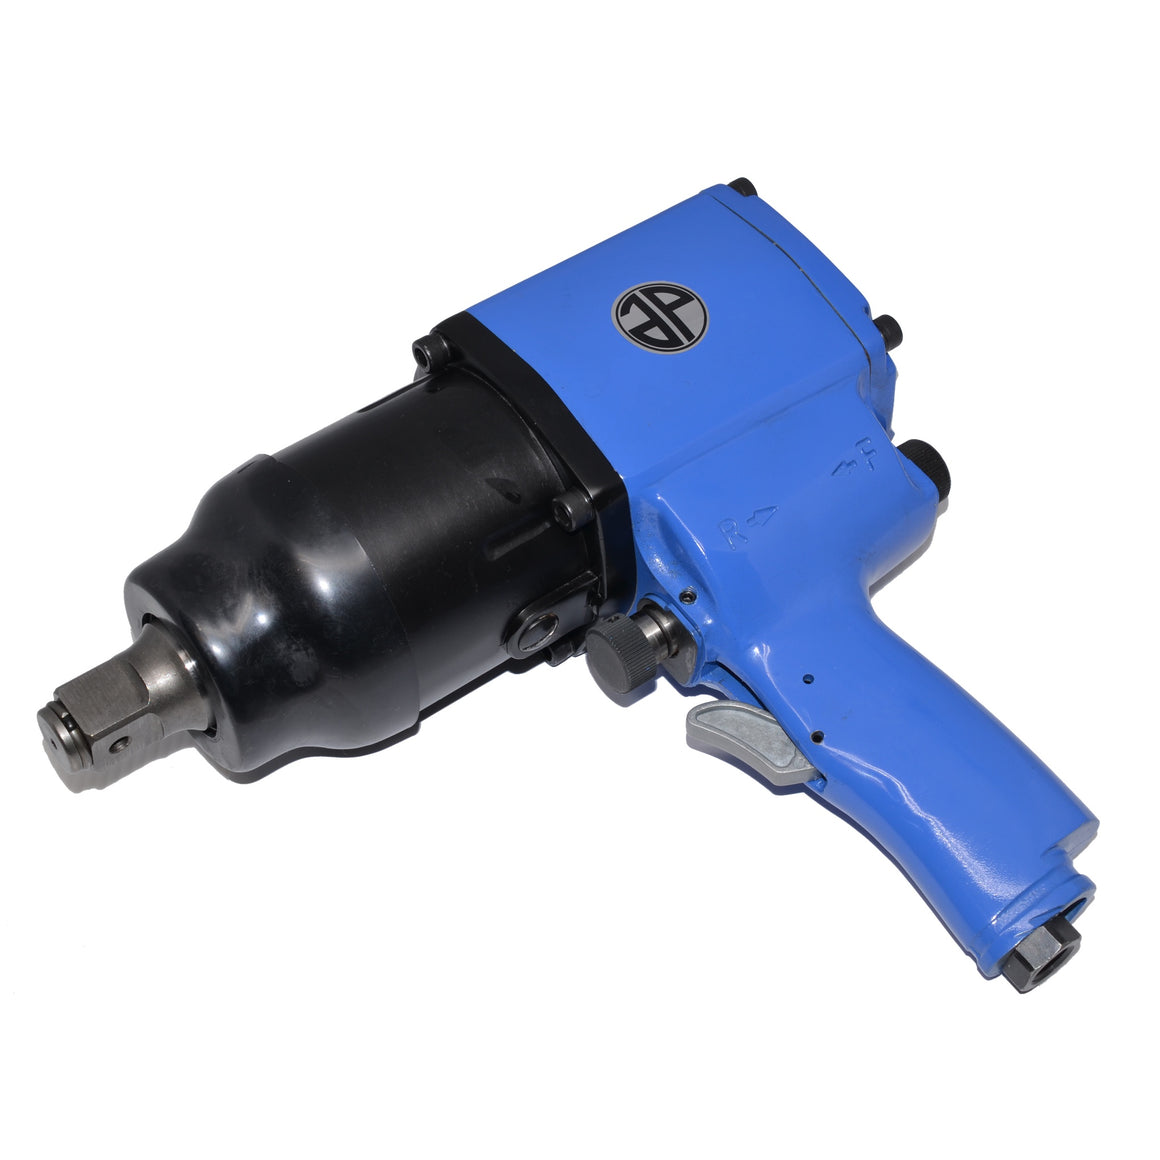 A159 - 3/4" Impact Wrench 1000 ft/lb